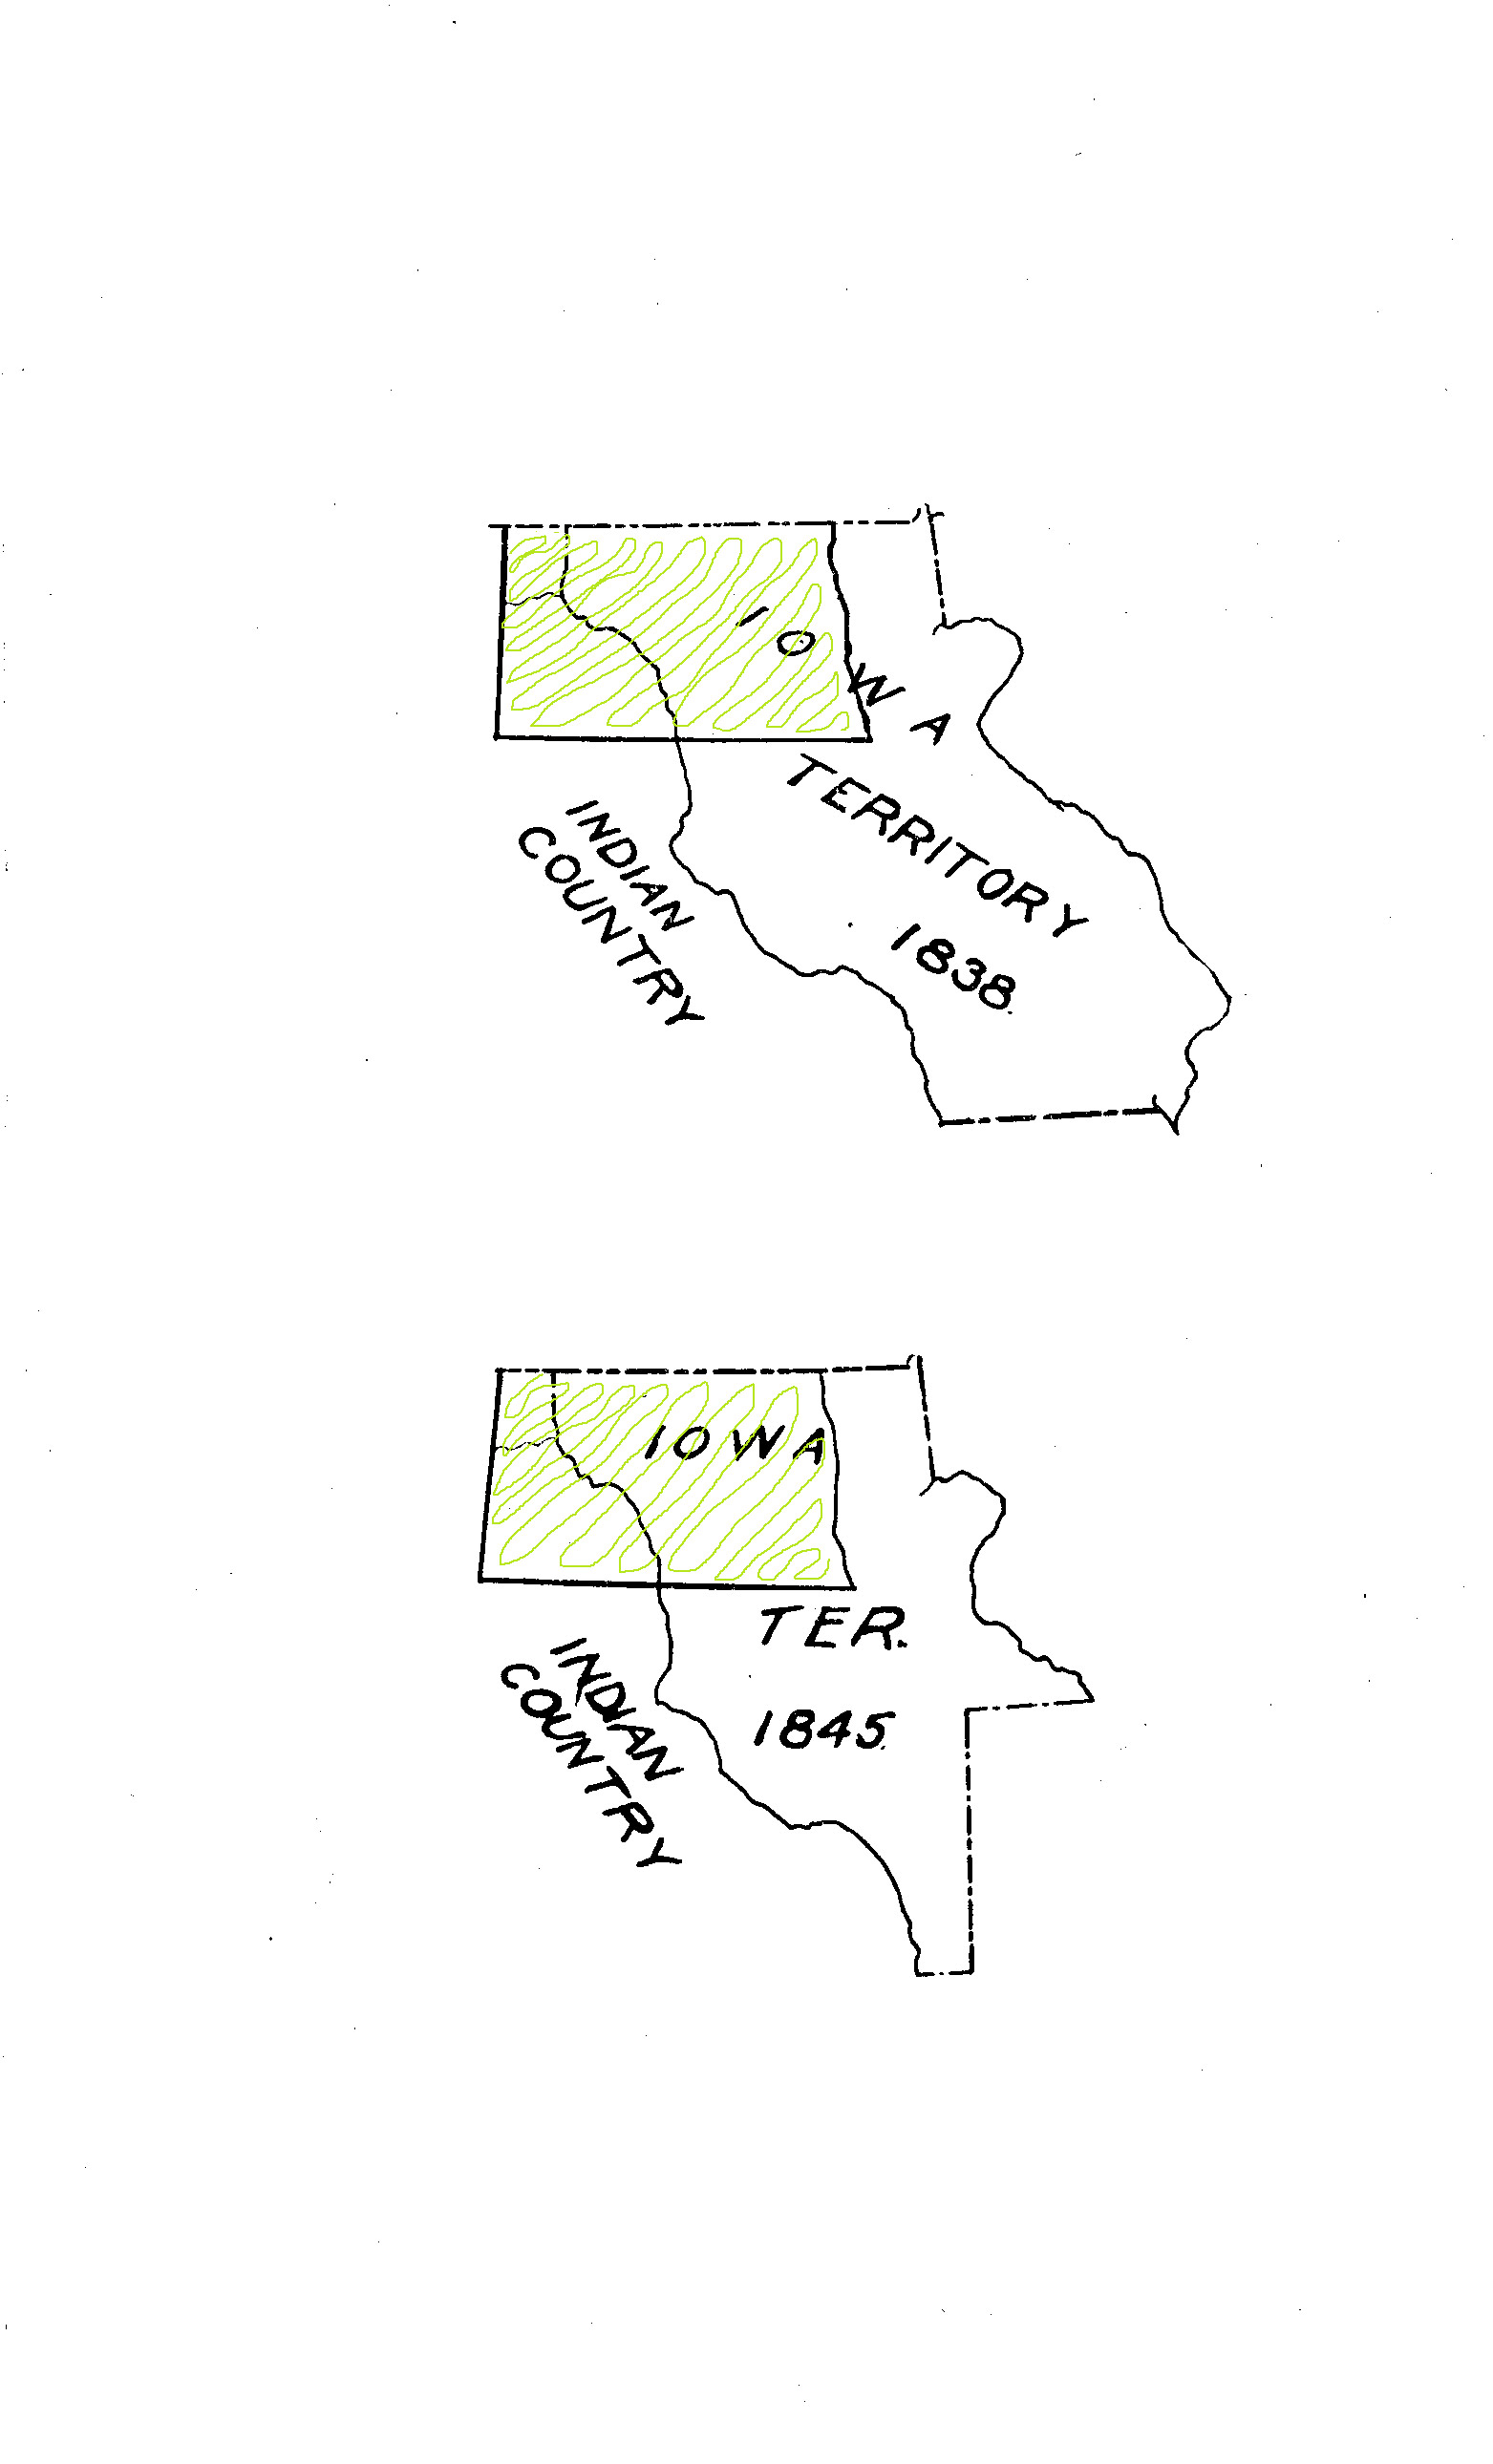 The territory took on another shape when Wisconsin Territory was re-organized into the shape it would have at statehood (1848). Iowa also changed its shape a few more times before it became a state in 1846.